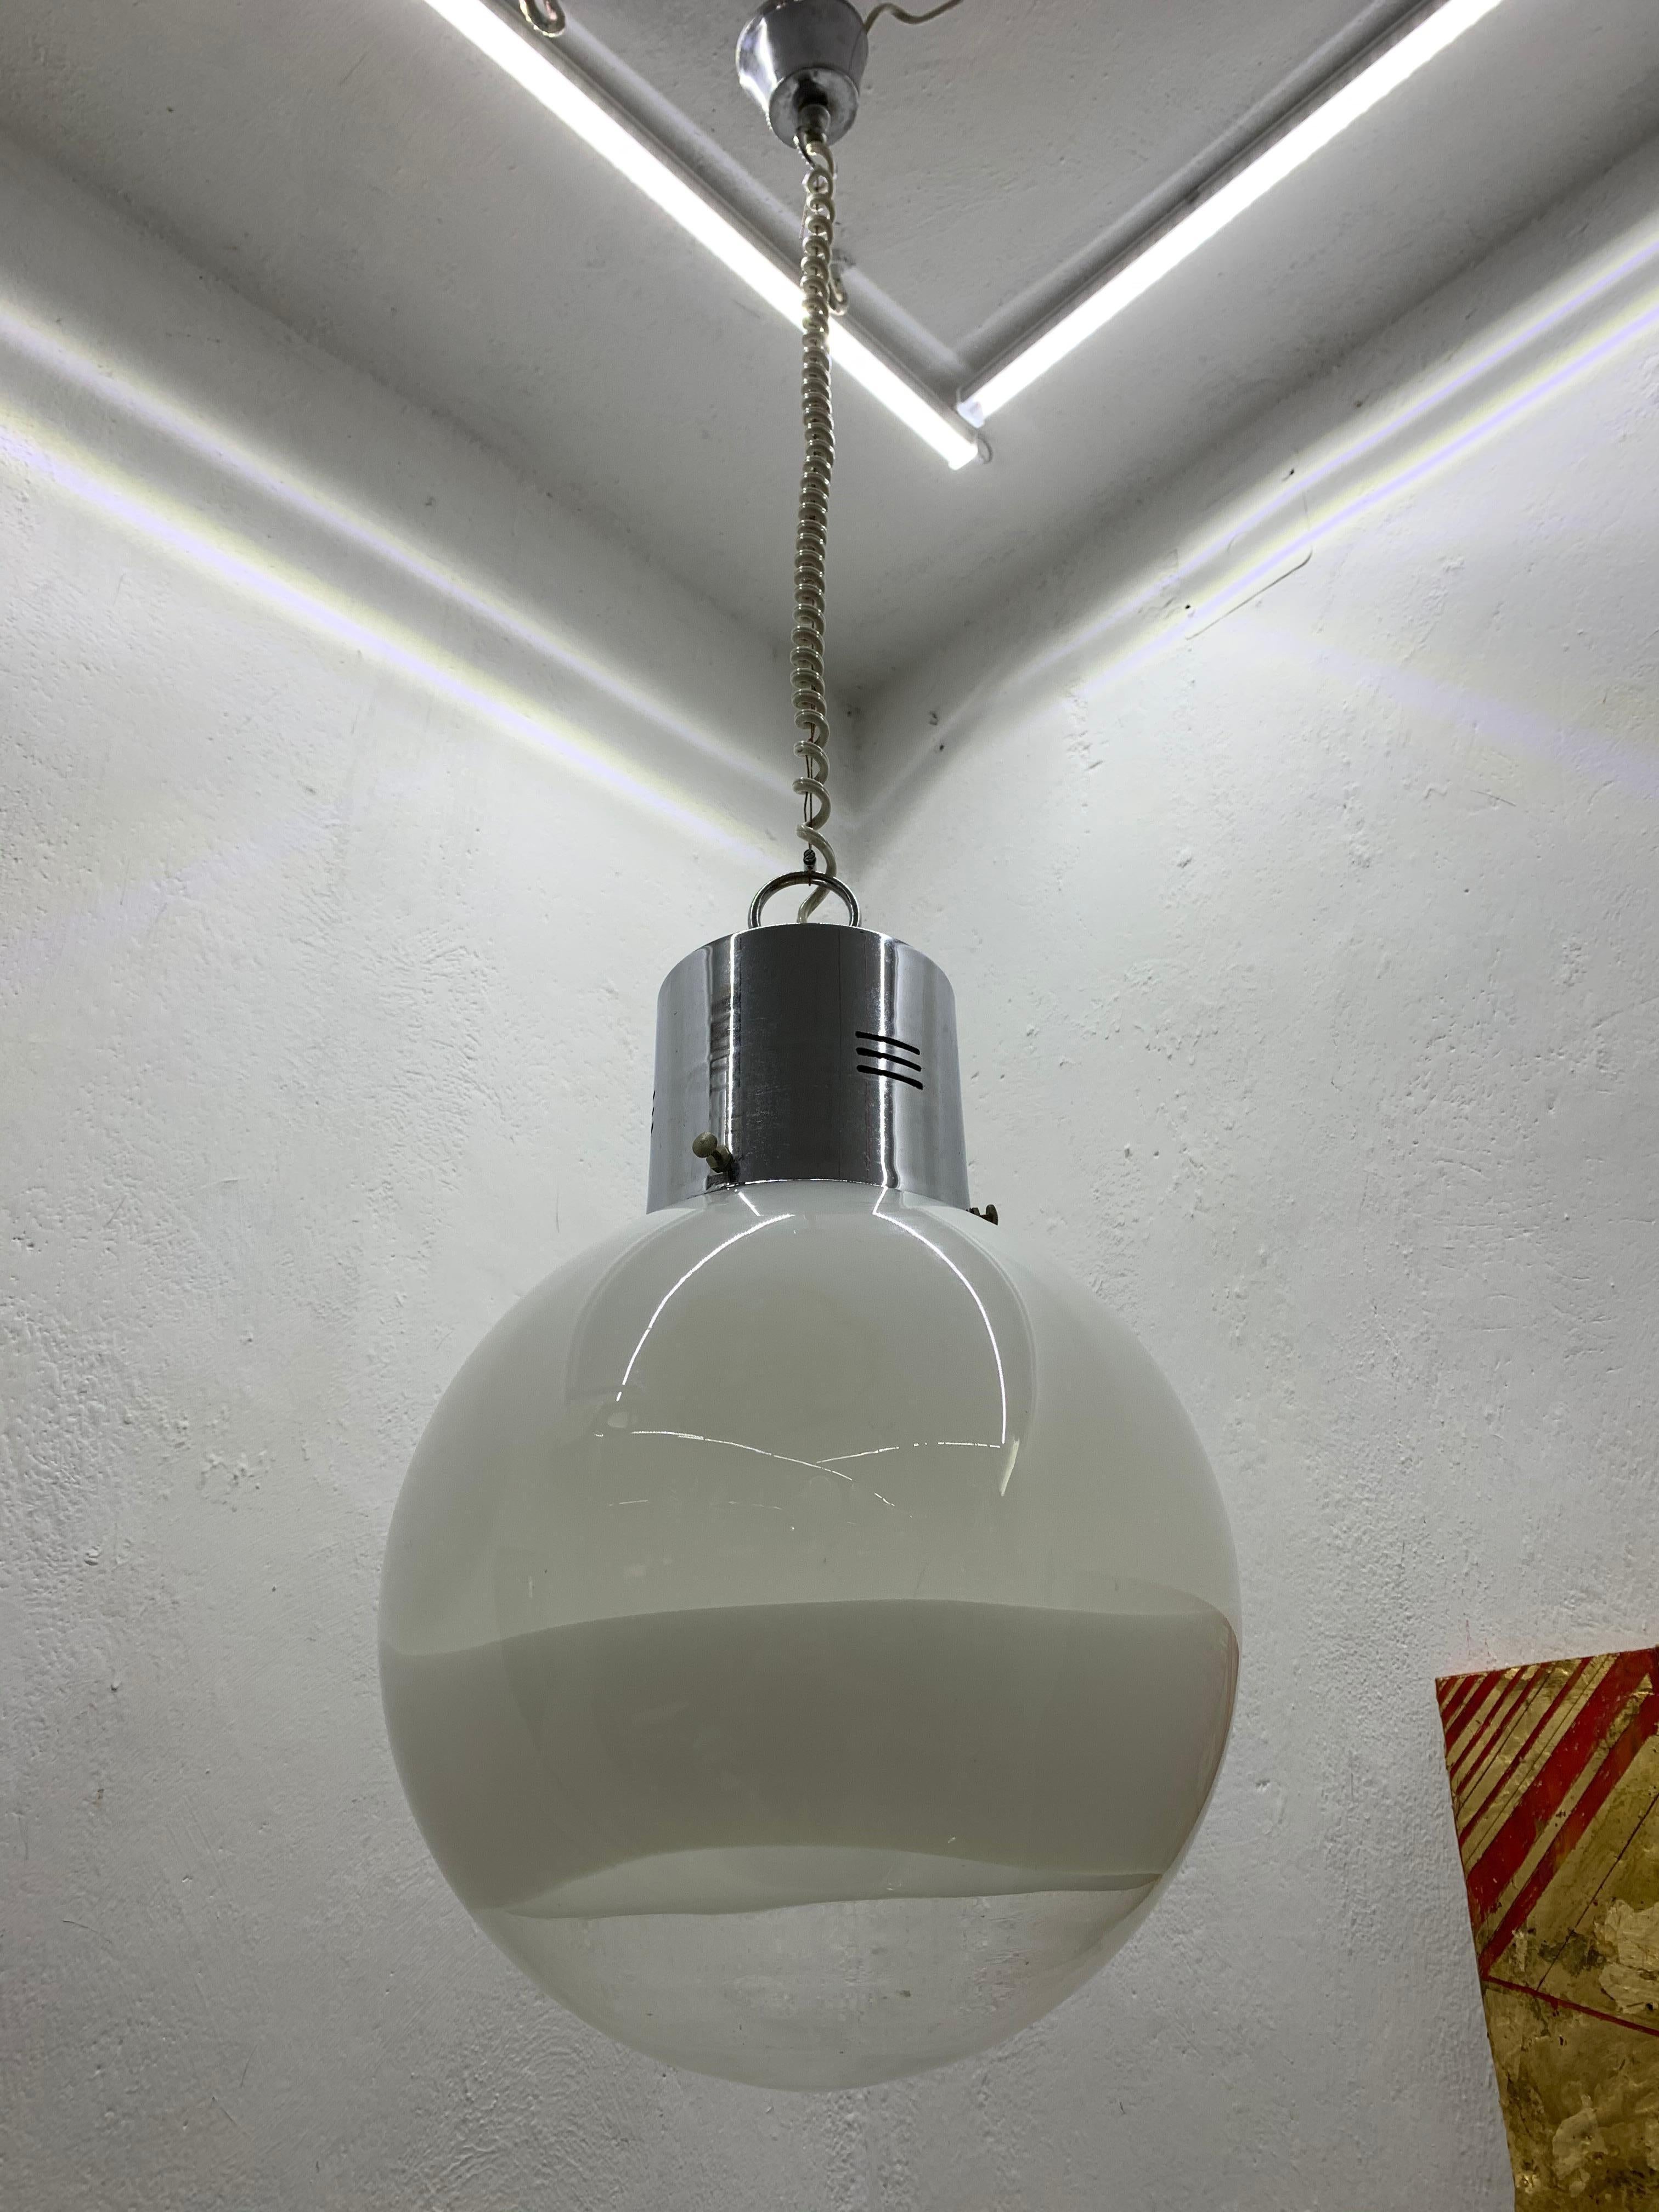 Mid-Century Modern chandelier / pendant light in clear and white hand blown Murano glass, in the style of Carlo Nason and attributed to Mazzega, circa 1970
Diameter is 30 cm and height of the ball including the hardware is 130cm which can easily be